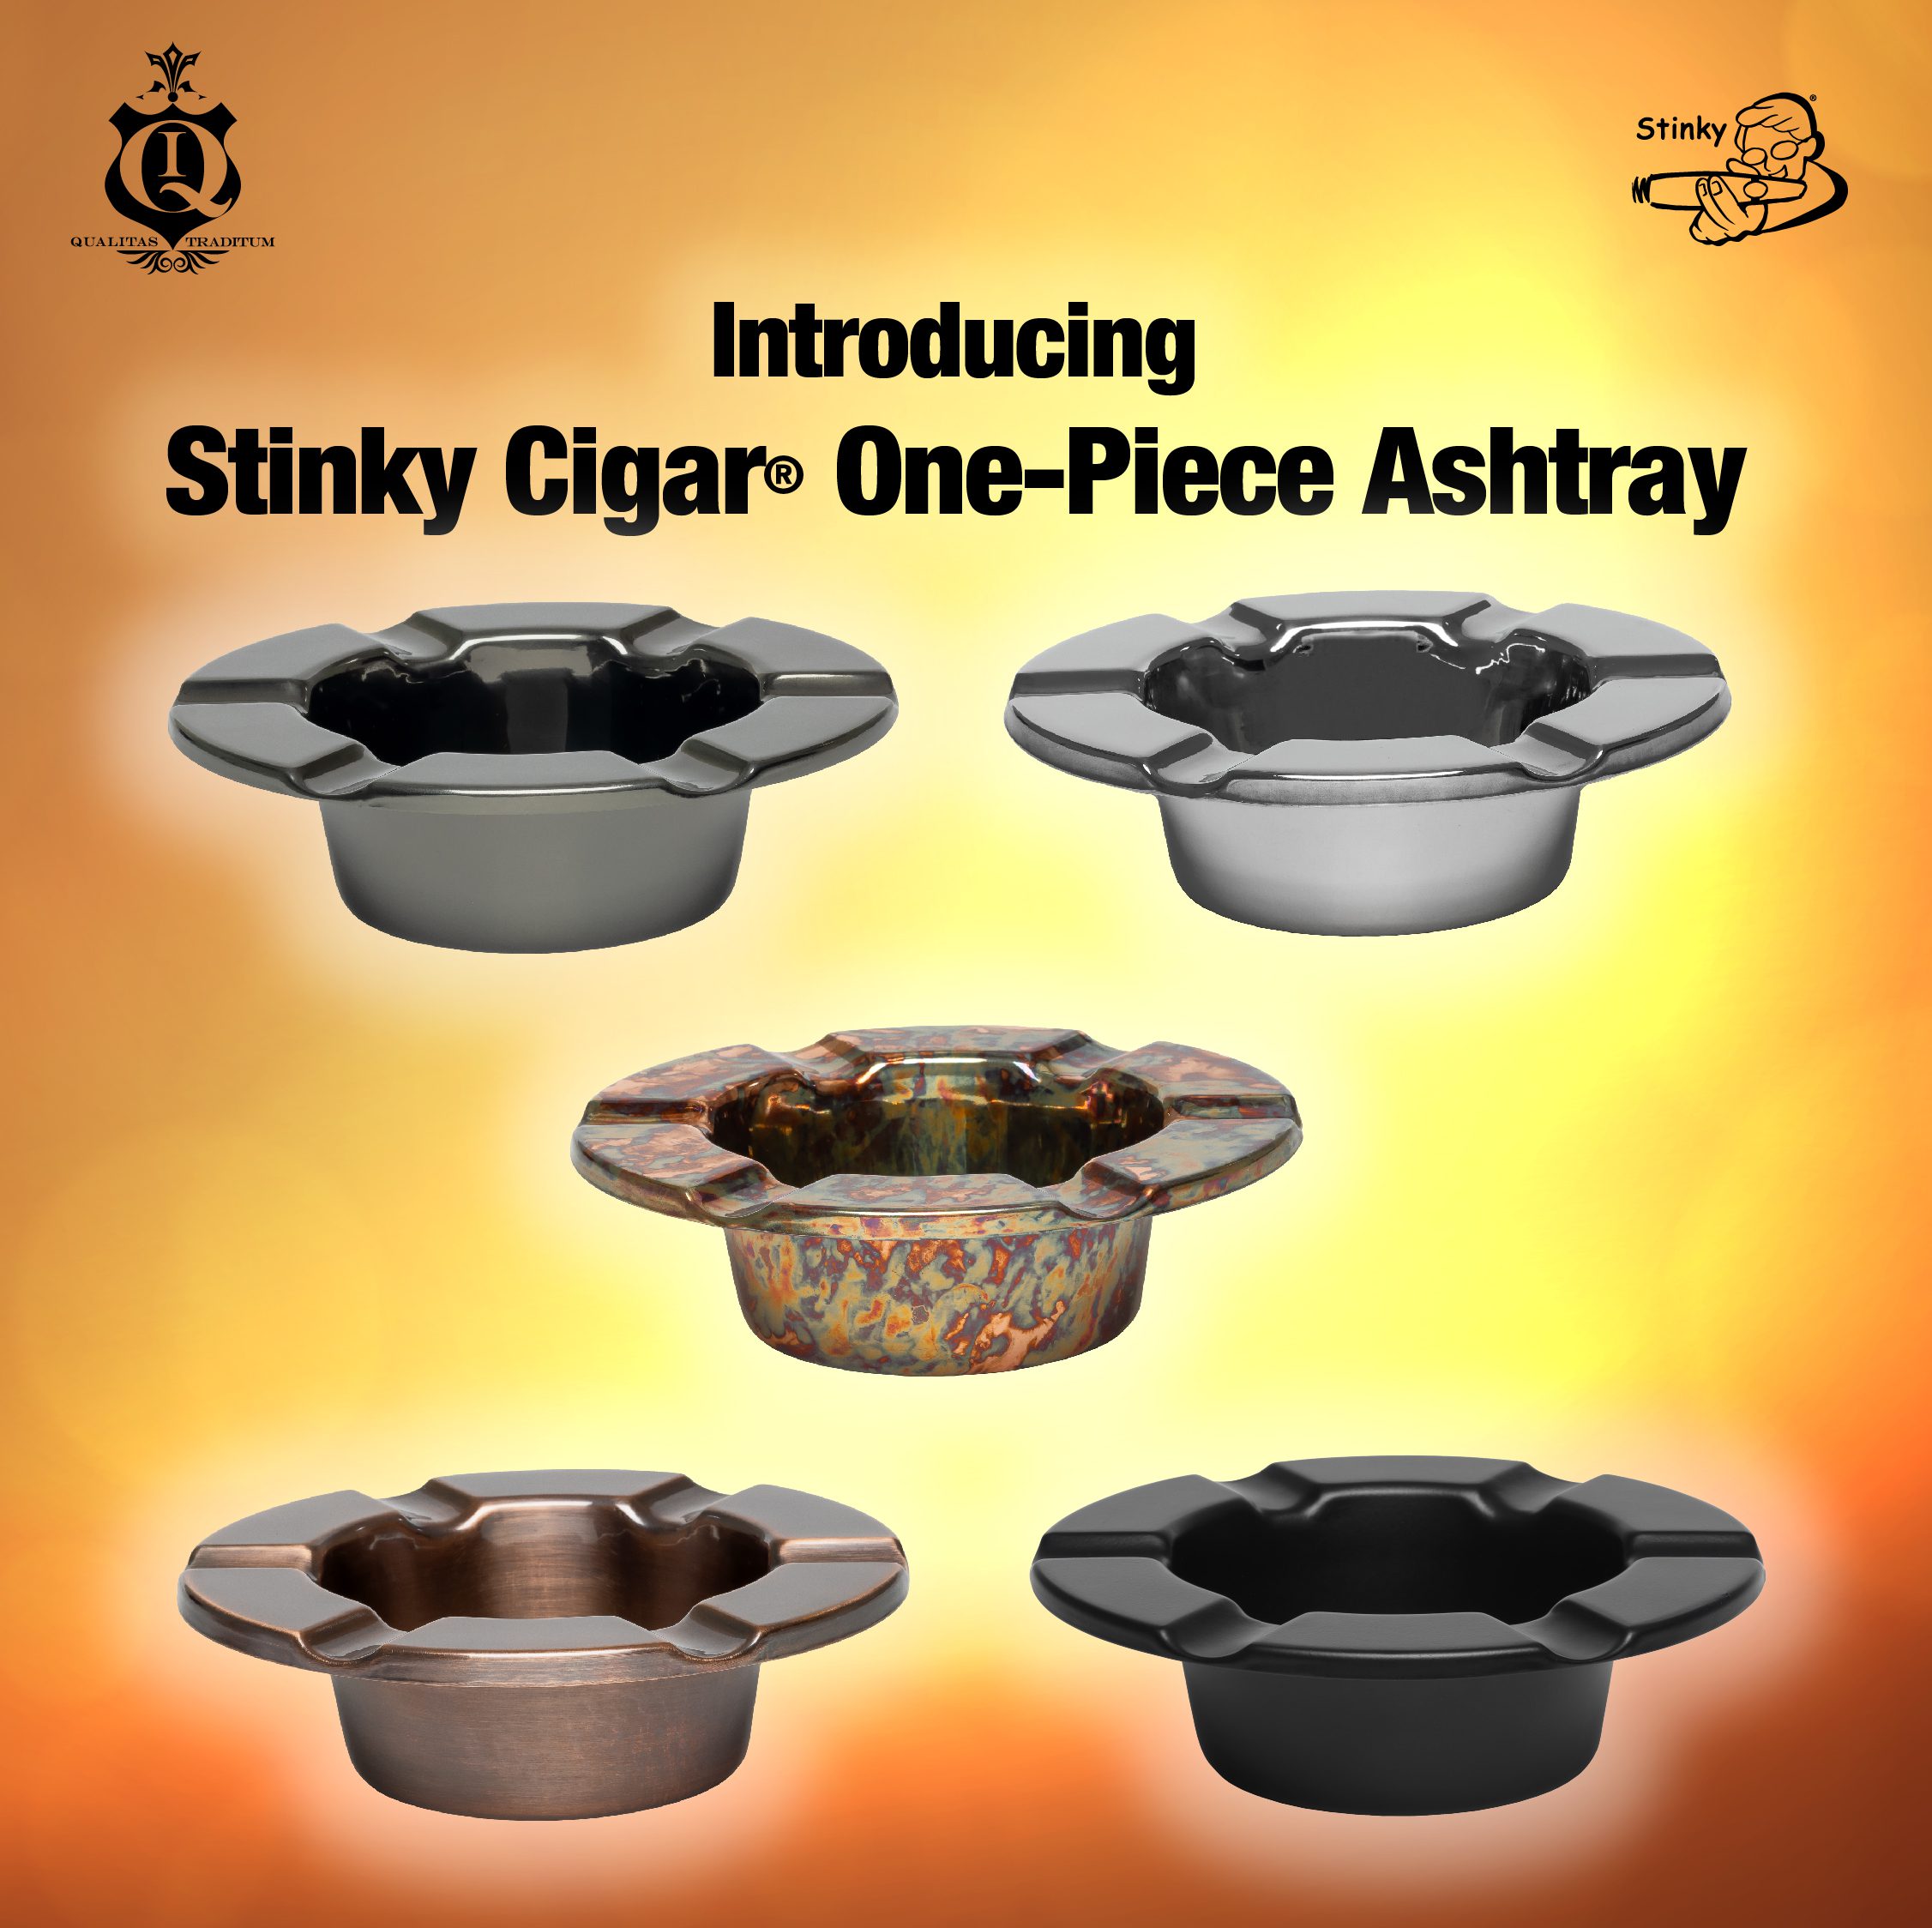 Stinky Cigar One Piece Ashtray in five different colors